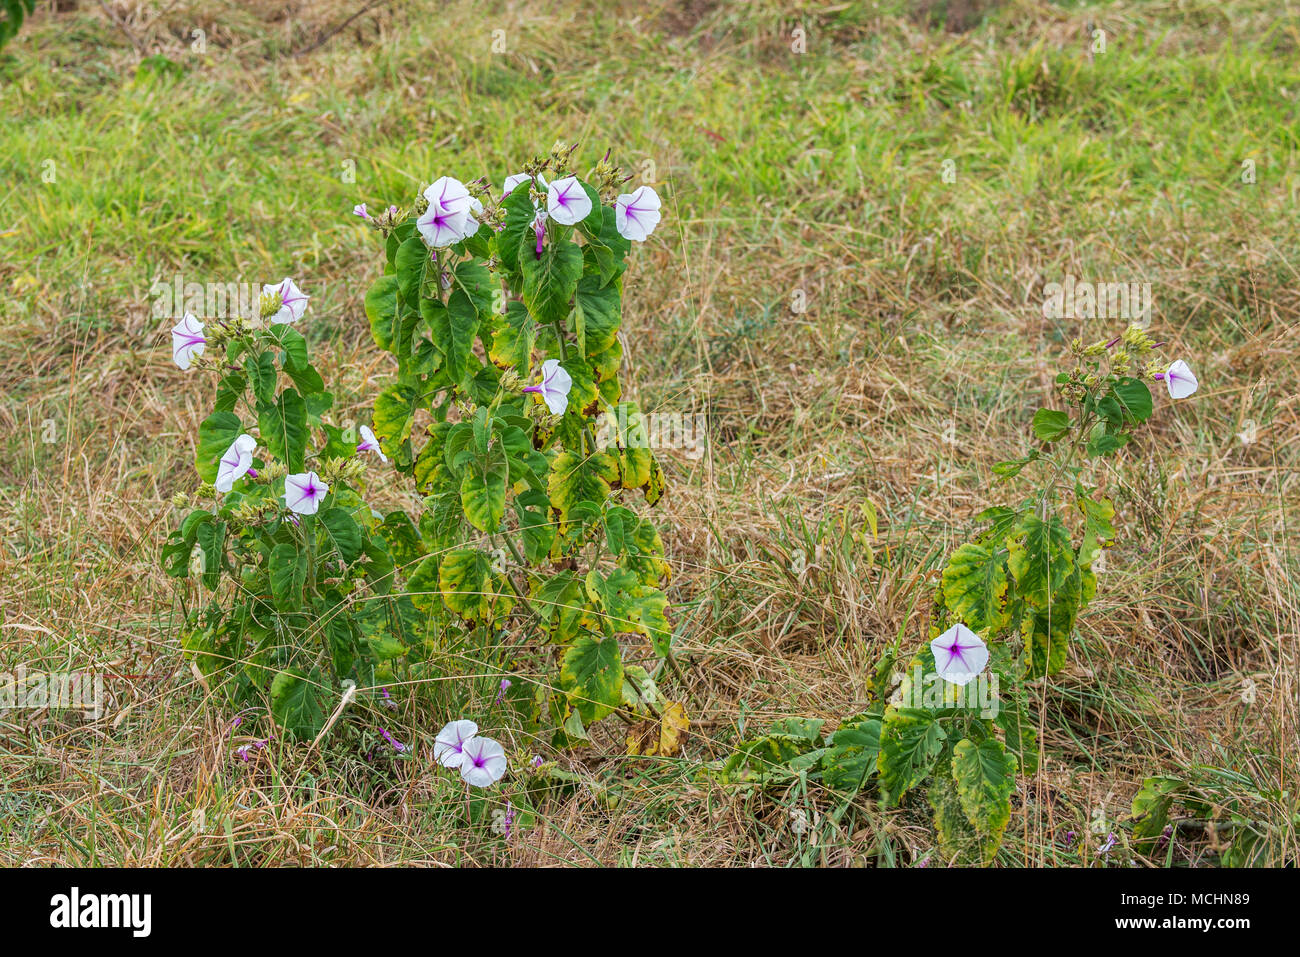 A PATCH OF MORNING GLORY BUSH WITH WHITE AND PURPLE FLOWER CLOSE UP, TARANGIRE NATIONAL PARK, TANZANIA Stock Photo